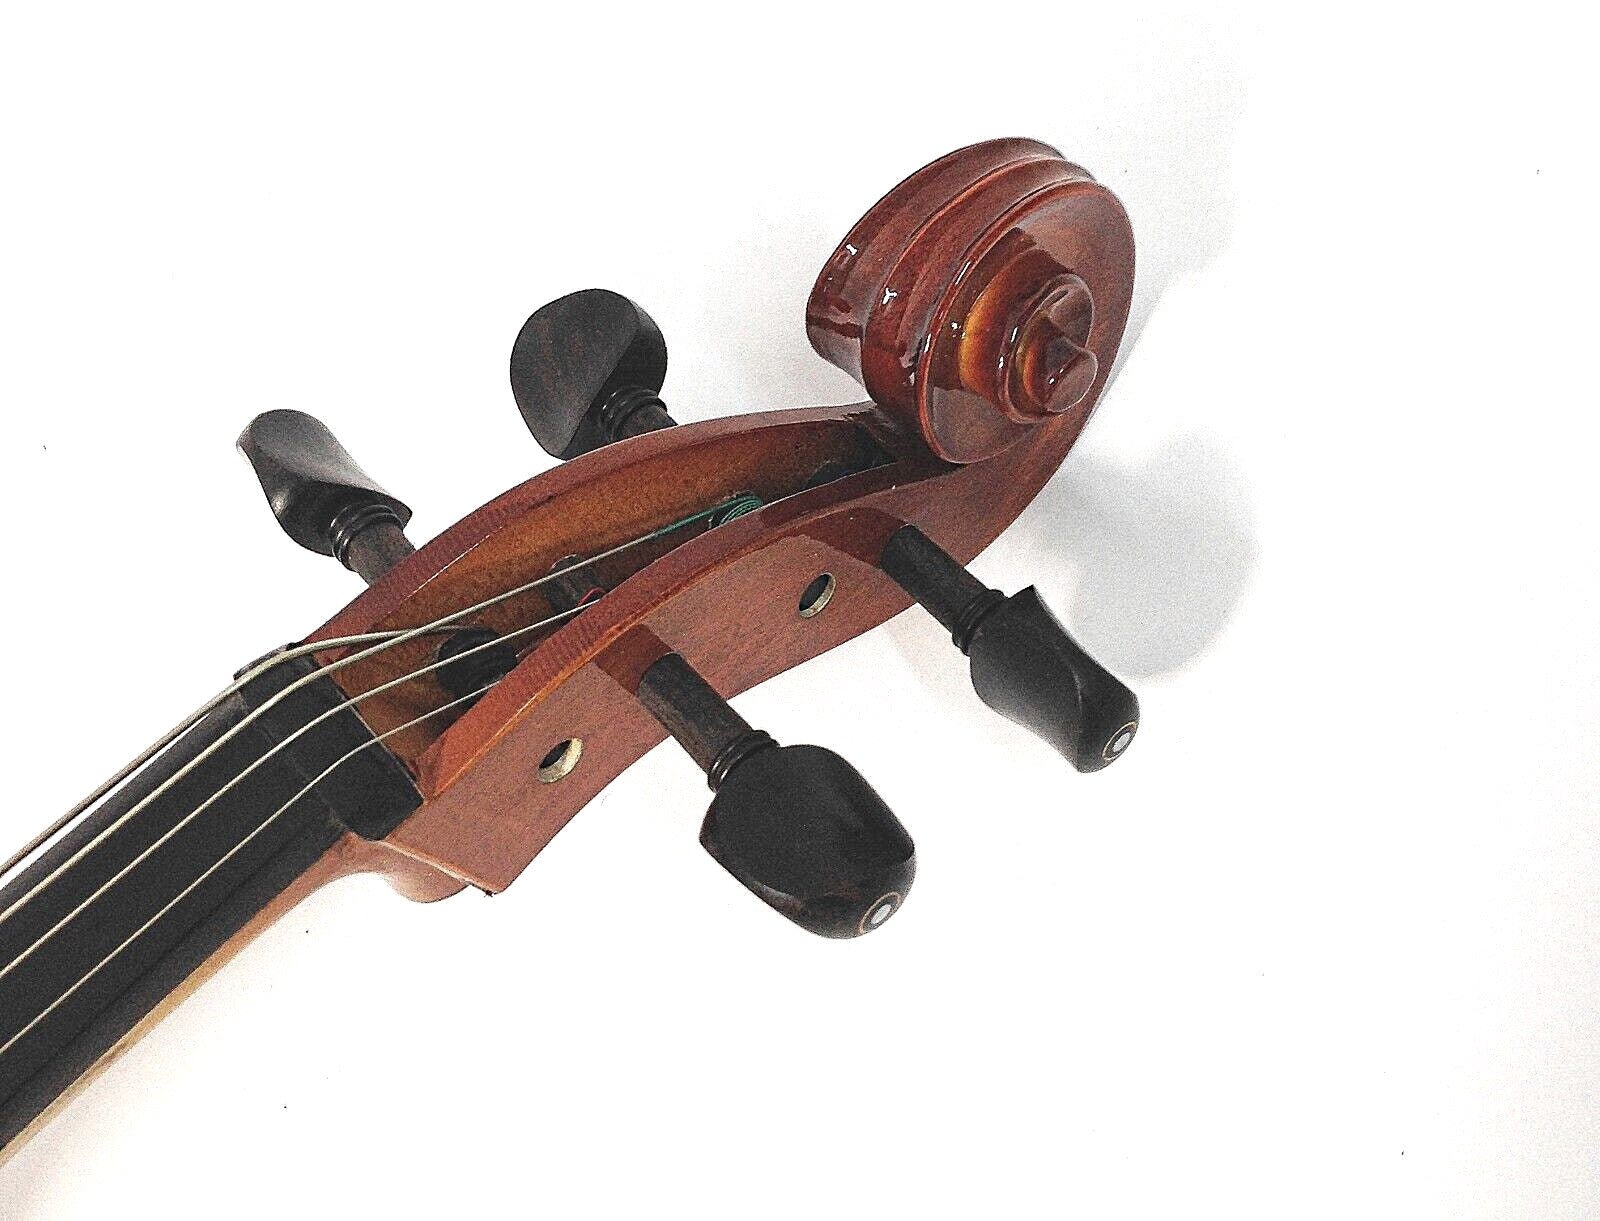 Symphony Solid wood handmade cello outfit LTC1150, 4/4 3/4 1/2 1/4 and 1/8 Size